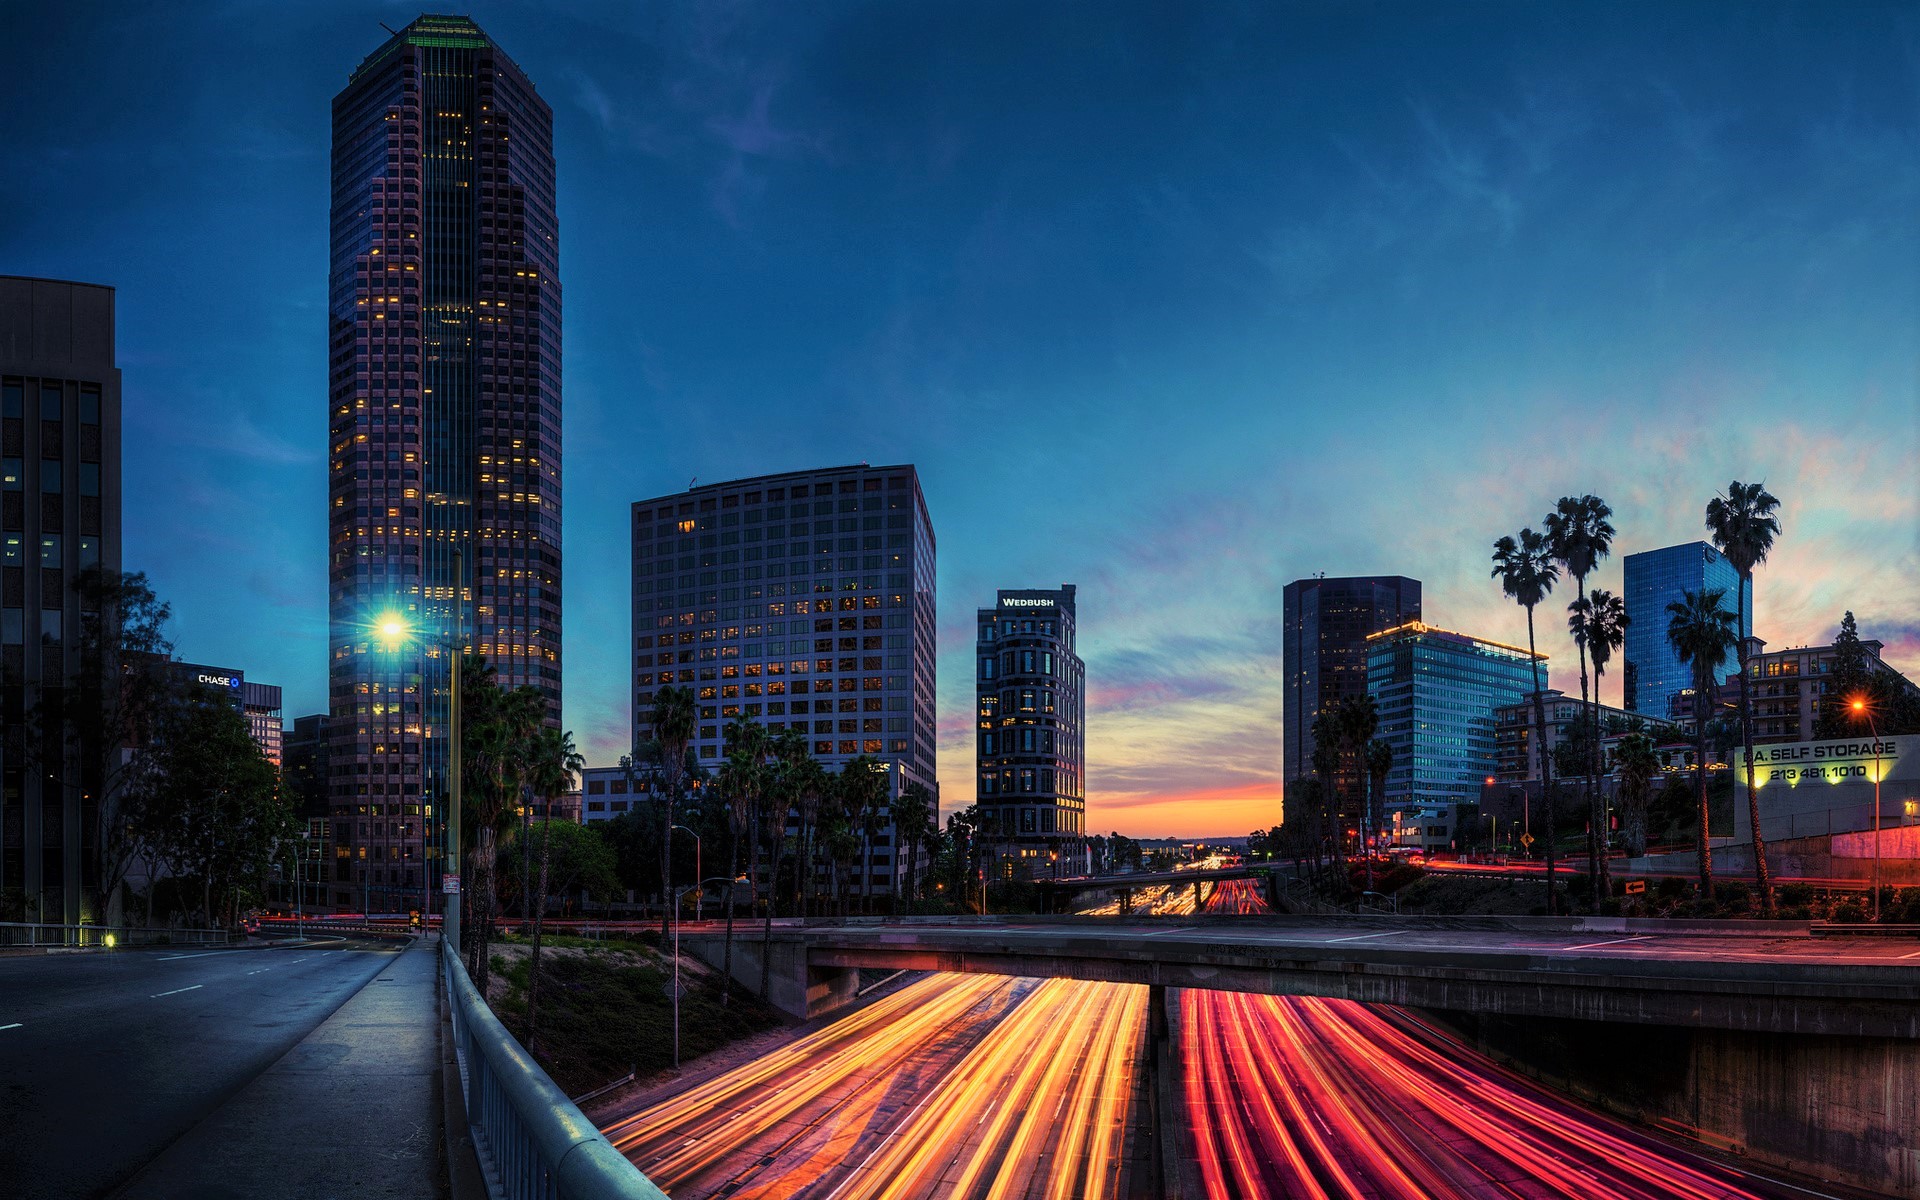 1K Los Angeles Night Pictures  Download Free Images on Unsplash